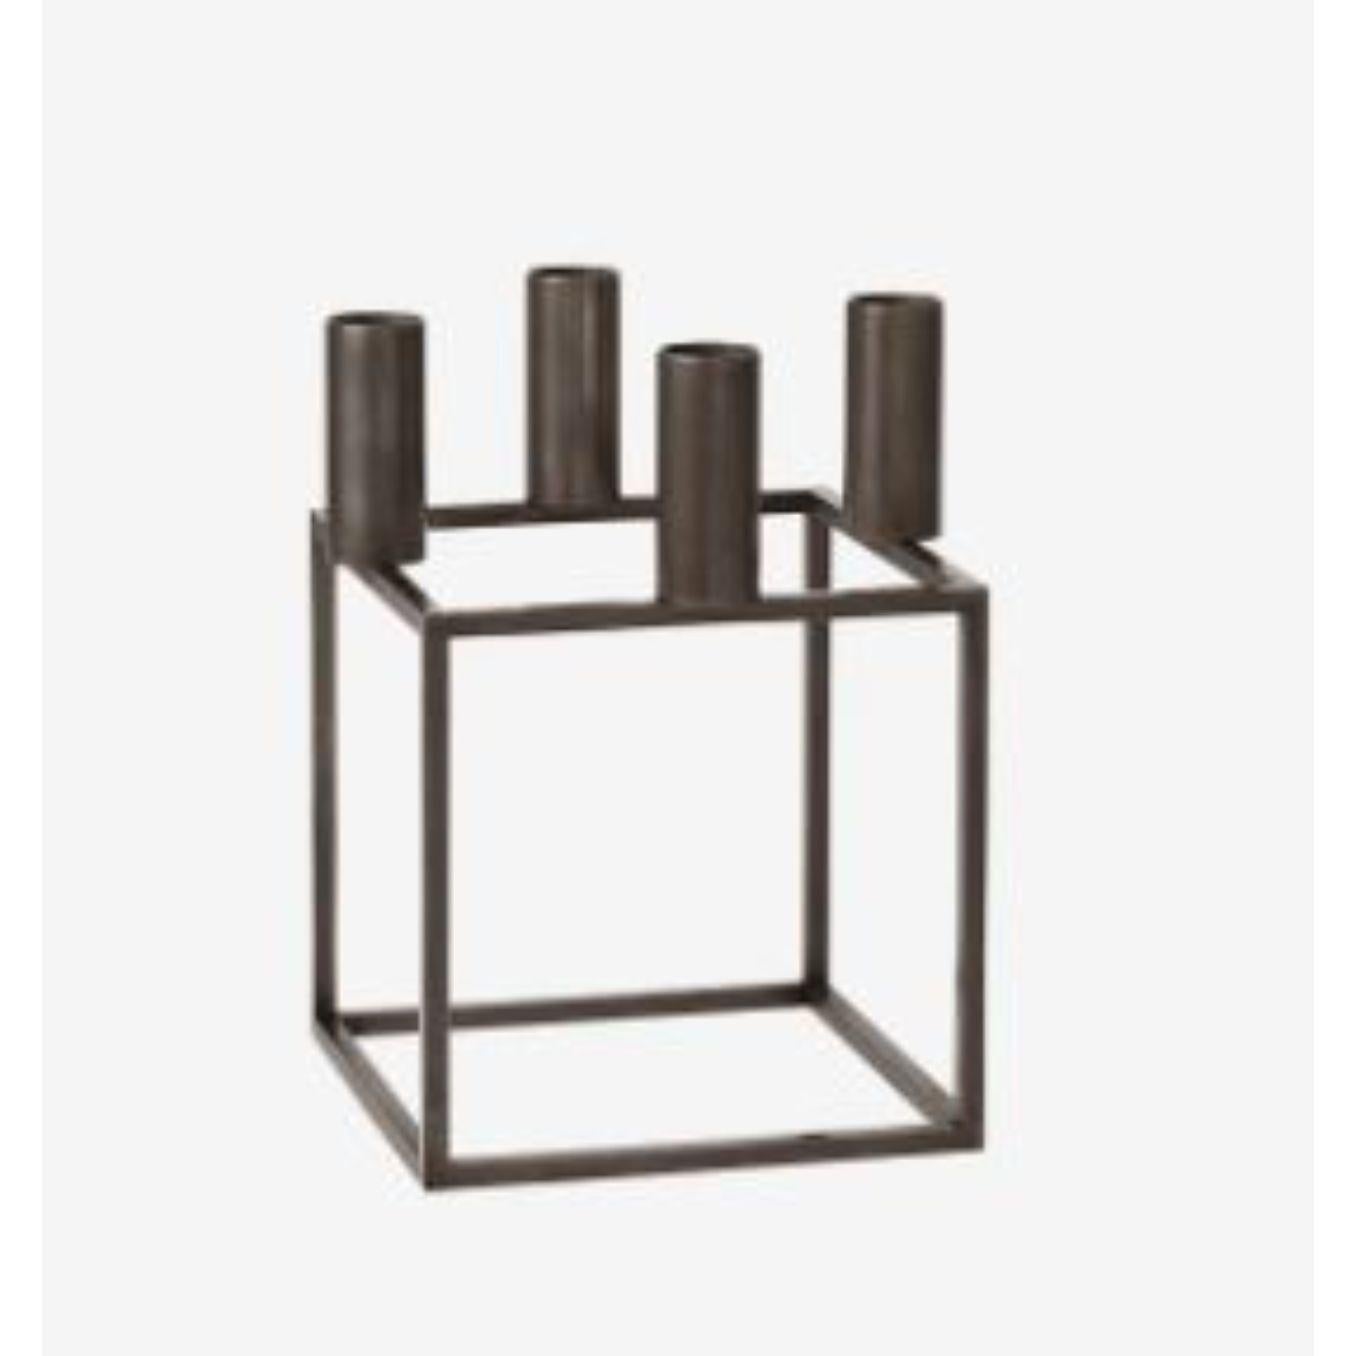 Burnished Copper Kubus 4 candle holder by Lassen
Dimensions: D 14 x W 14 x H 20 cm 
Materials: Metal 
Also available in different dimensions. 
Weight: 1.50 Kg

A new small wonder has seen the light of day. Kubus Micro is a stylish, smaller